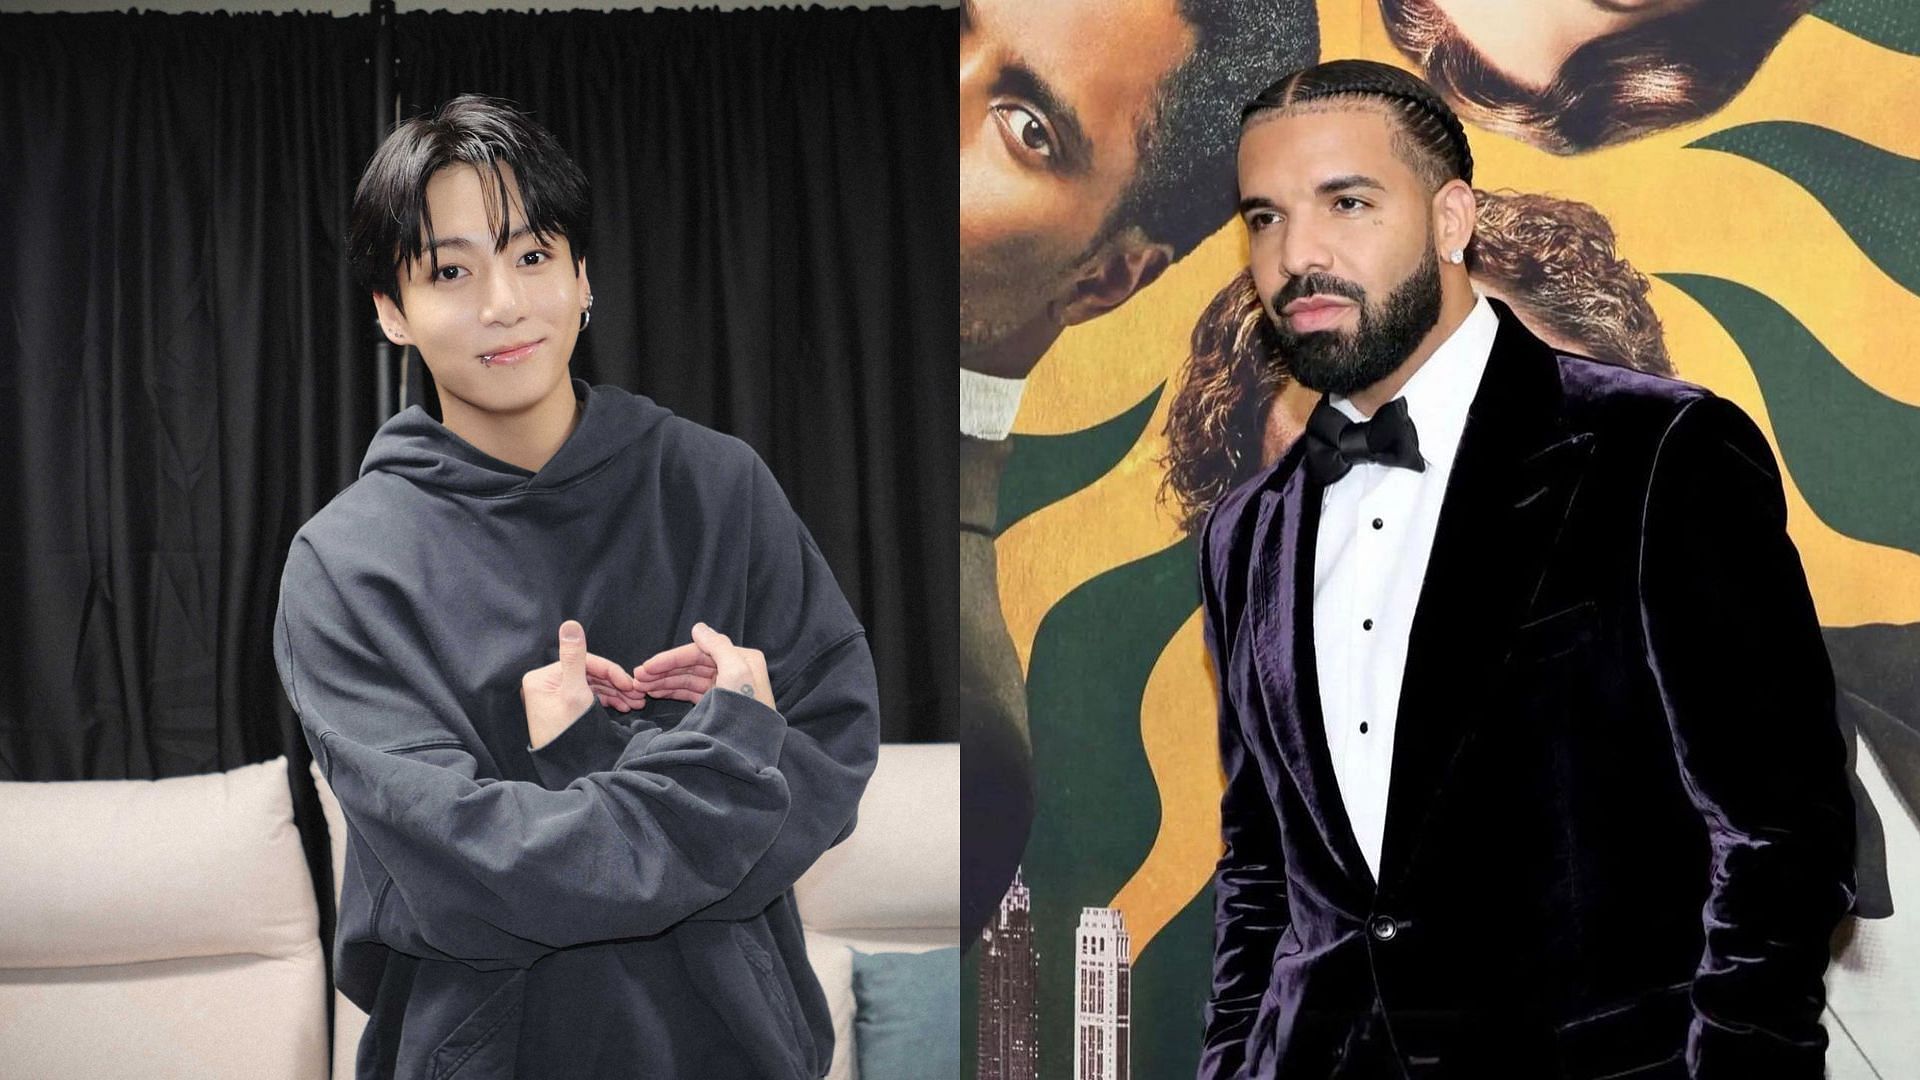 Jungkook ties with Drake (images via Twitter/bts_bighit and Instagram/champagnepapi)